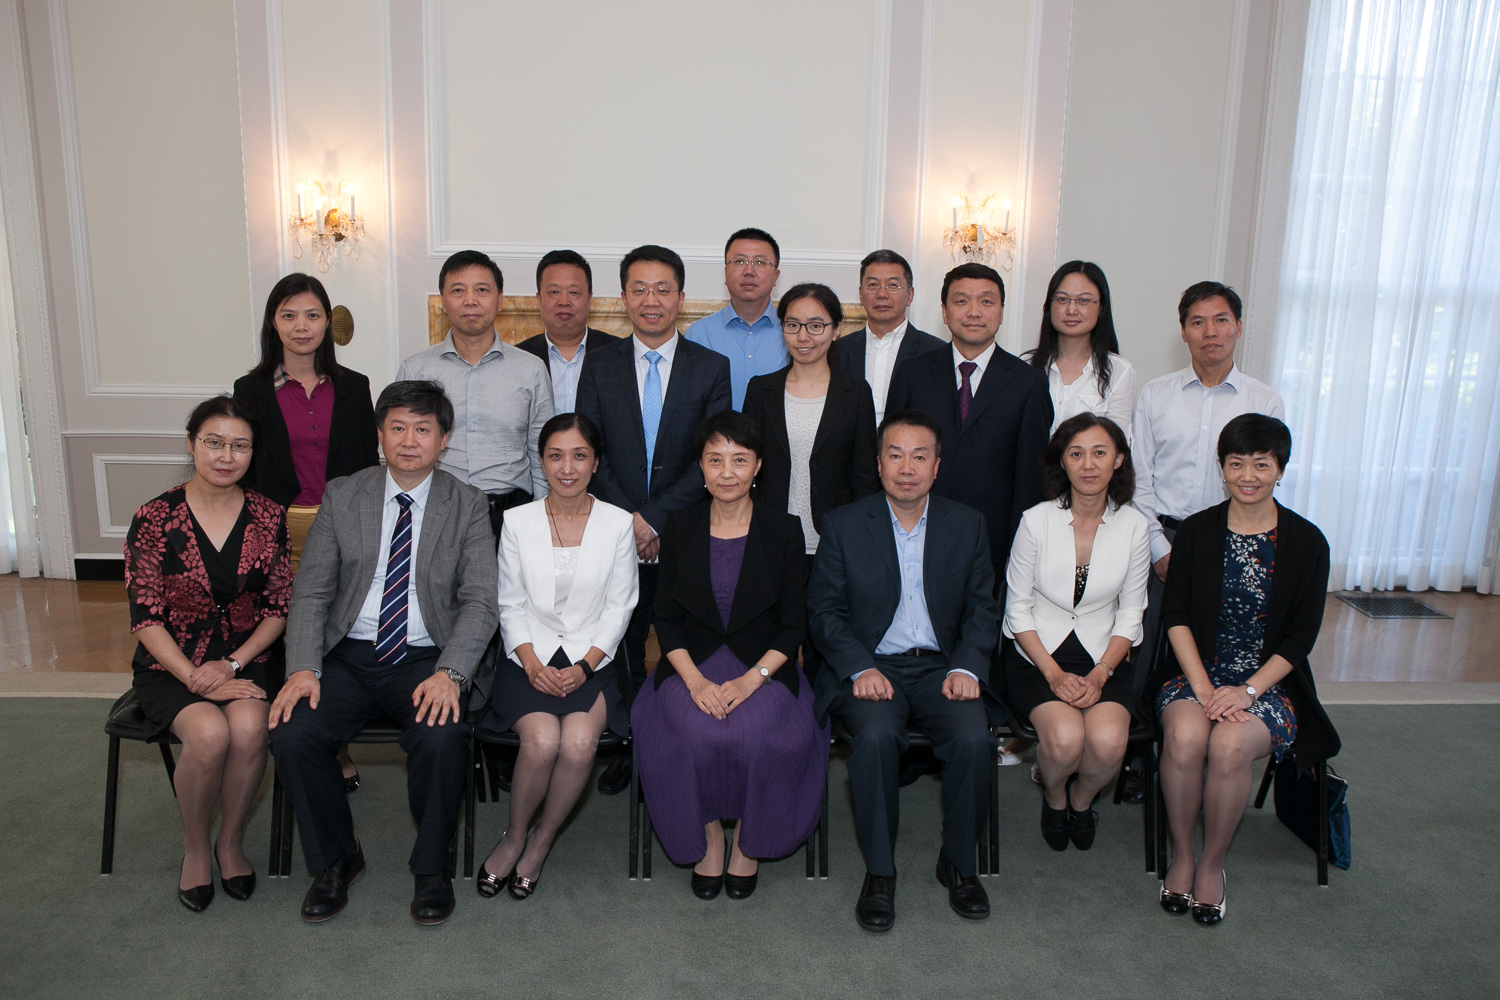 20 senior decision-makers from hospitals and national and local healthcare bureaus in China. John Boal Photography